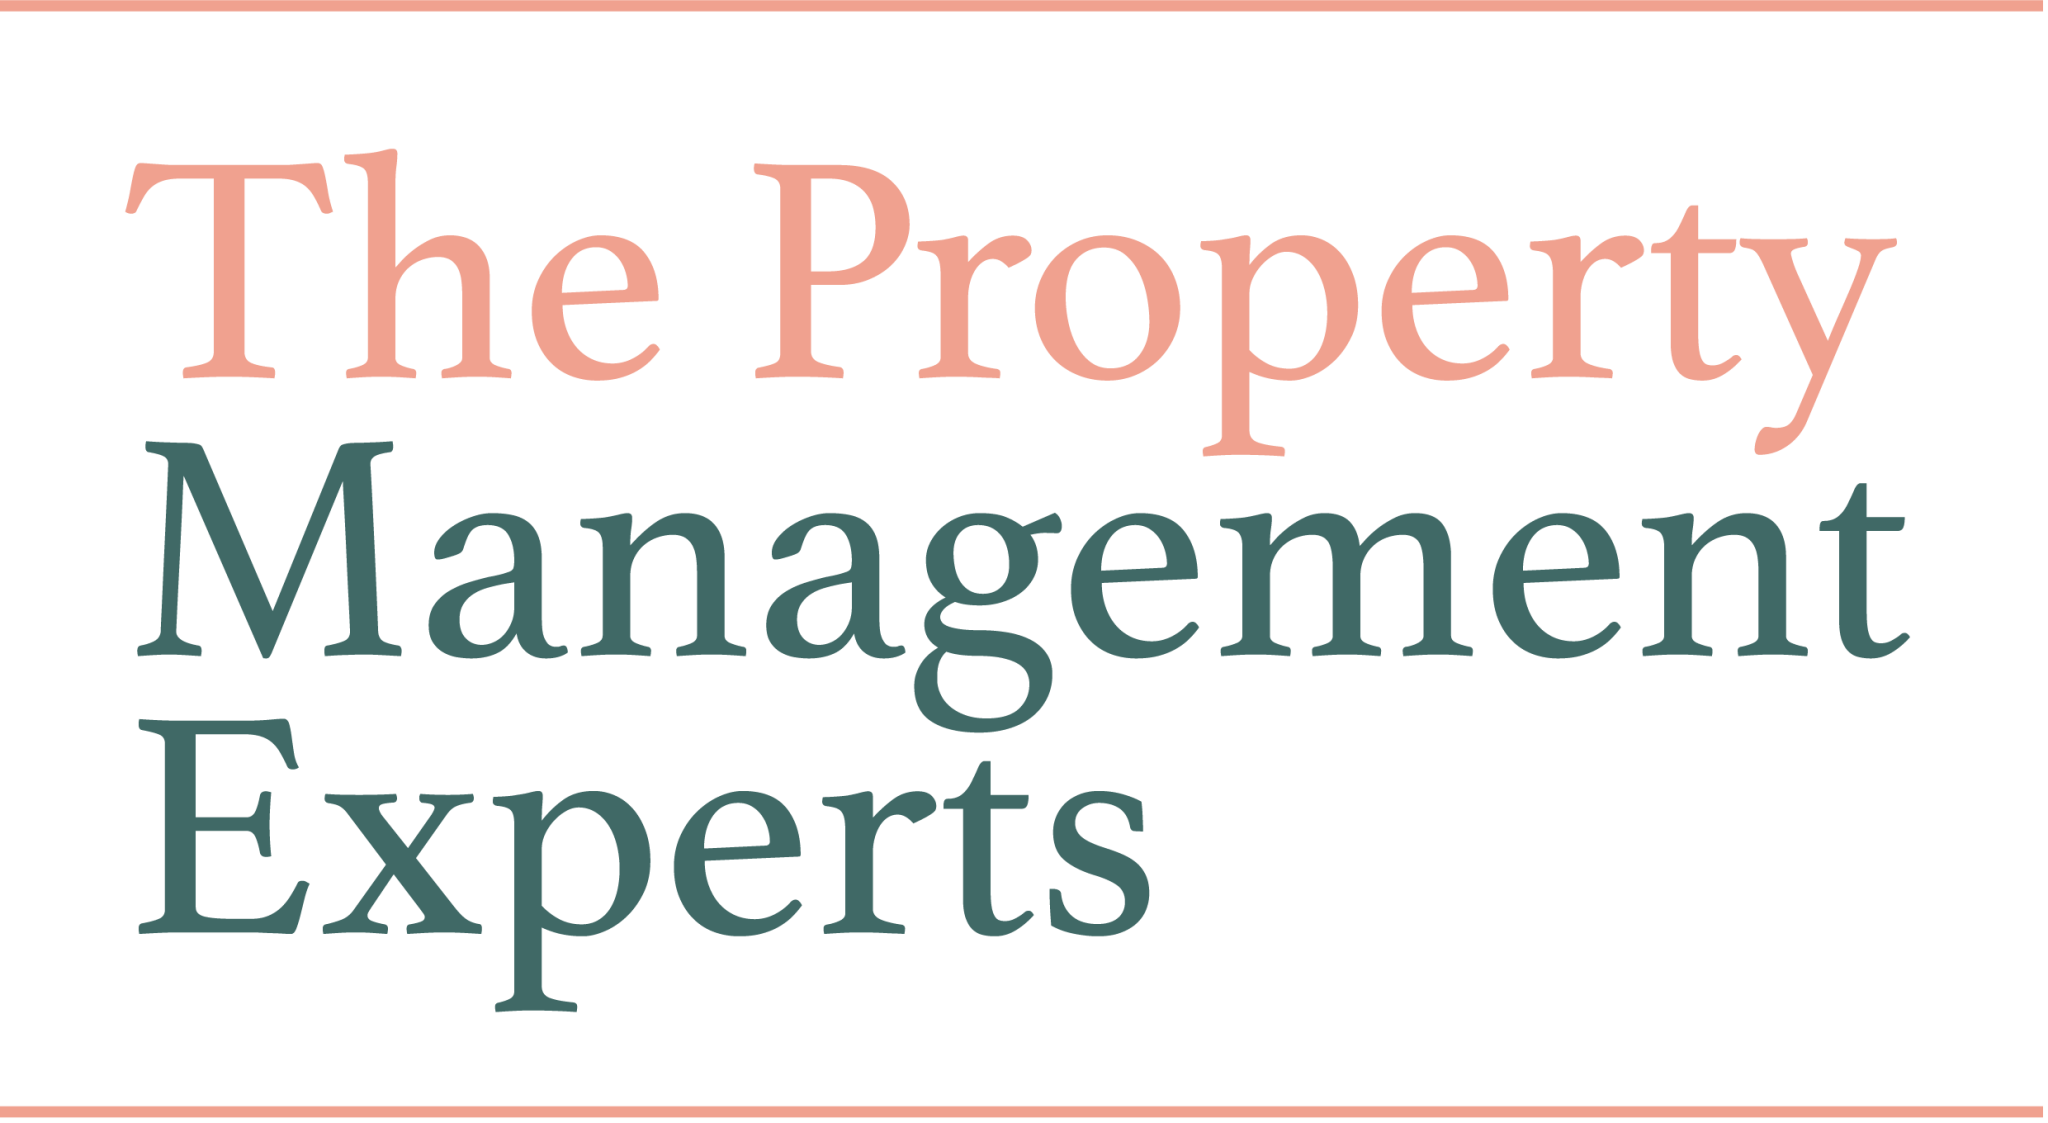 The Property Management Experts - Real Estate Agency